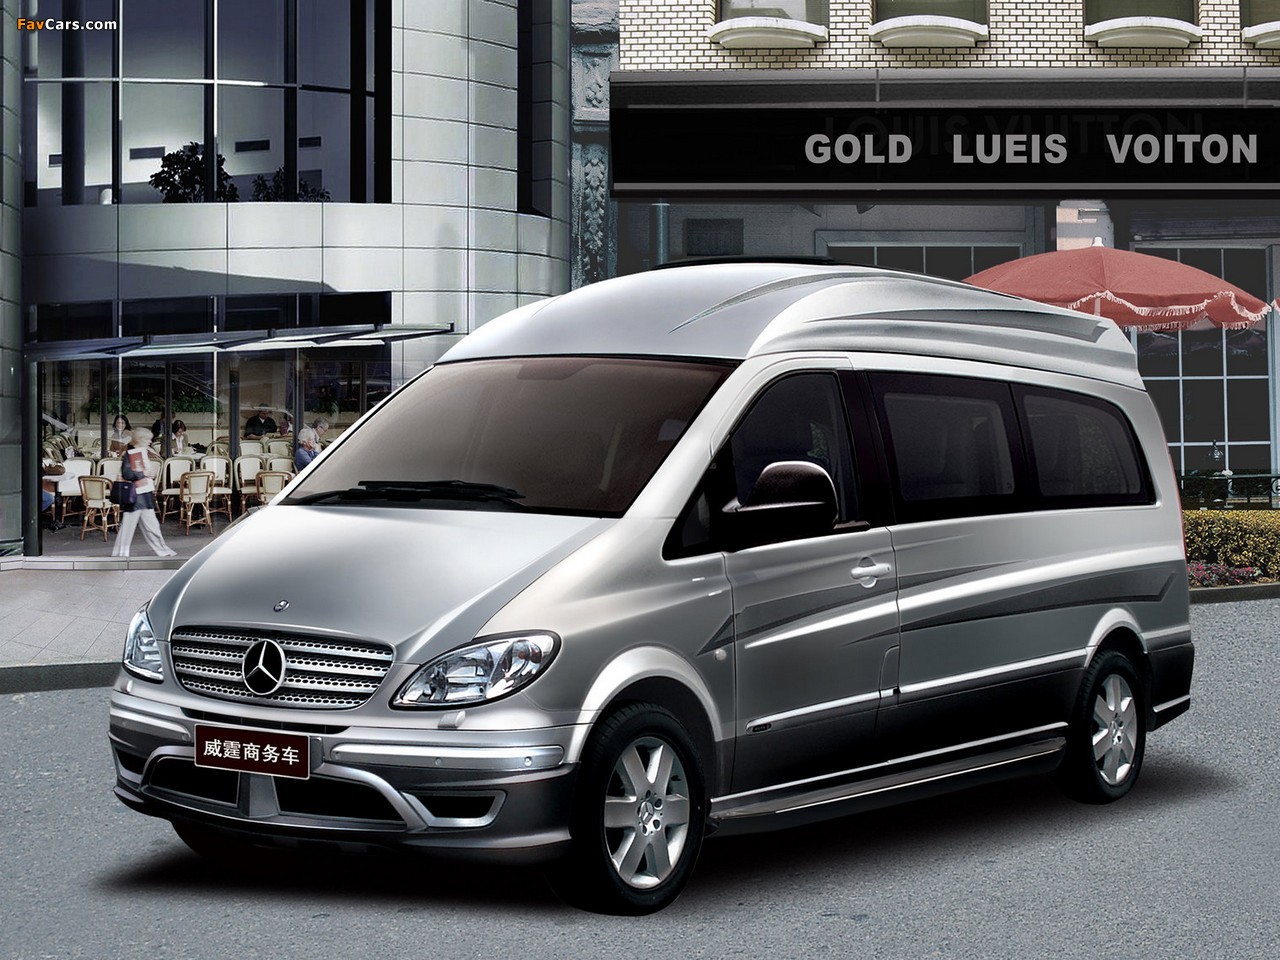 Pictures of Zhongyu Automobile Vito 3 (1280 x 960)